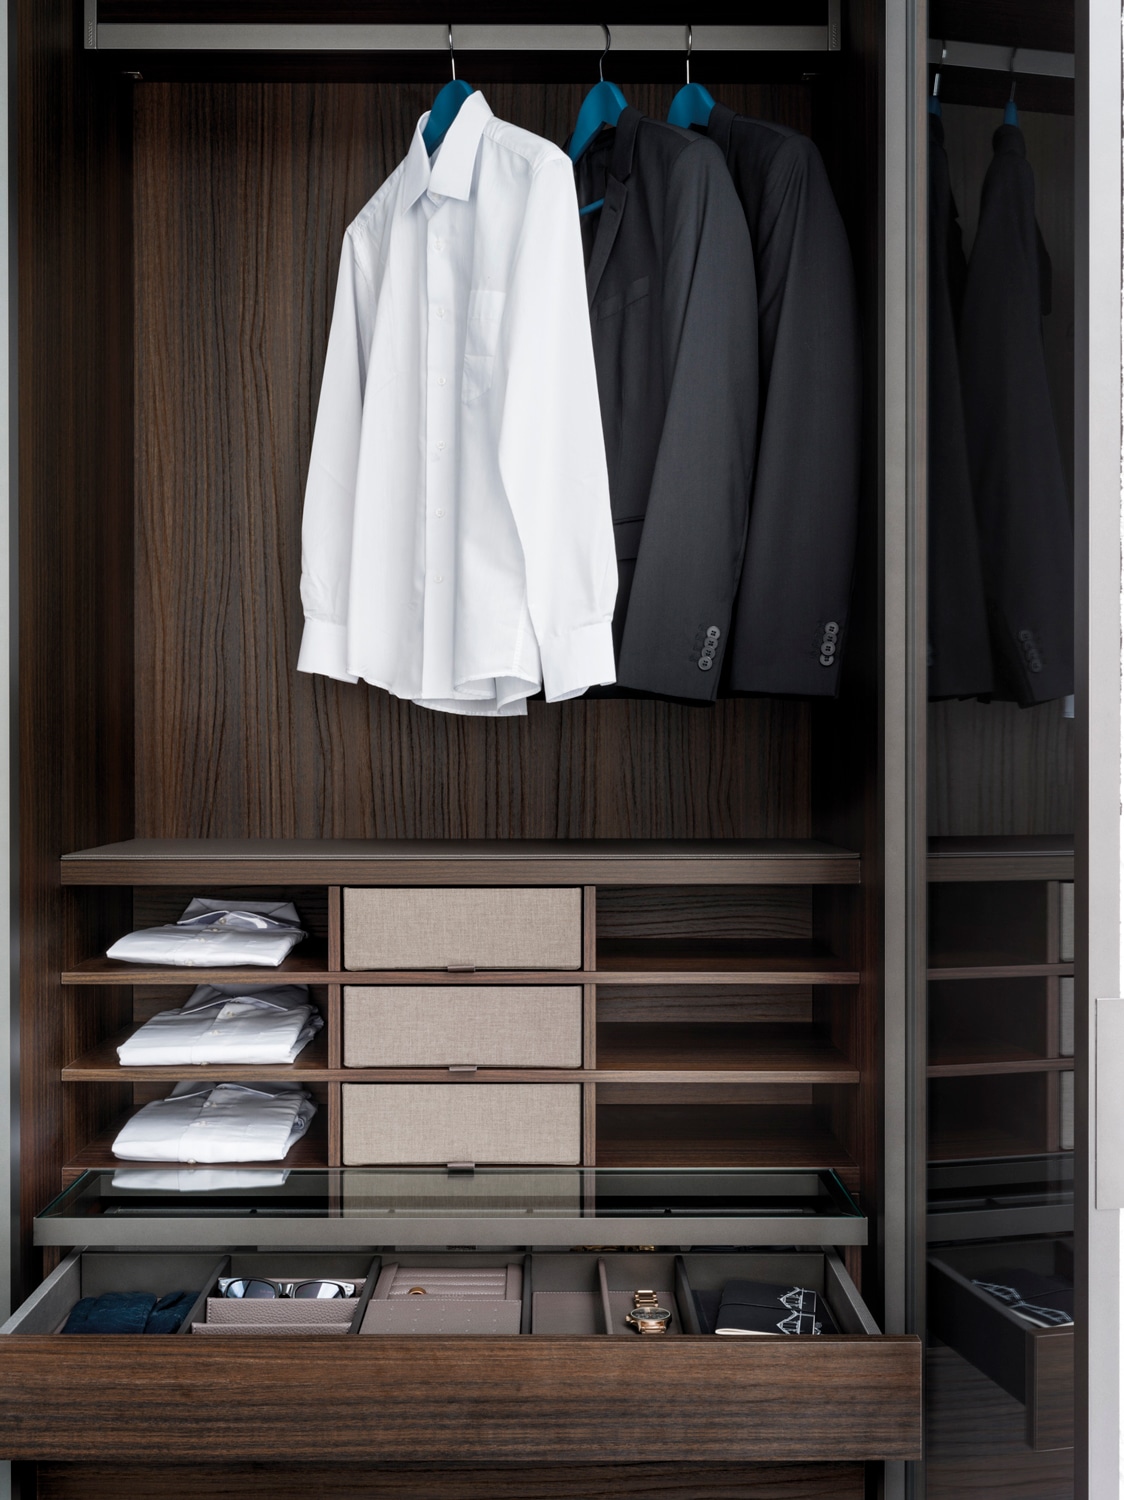 Accessorized, customizable closets and wardrobes